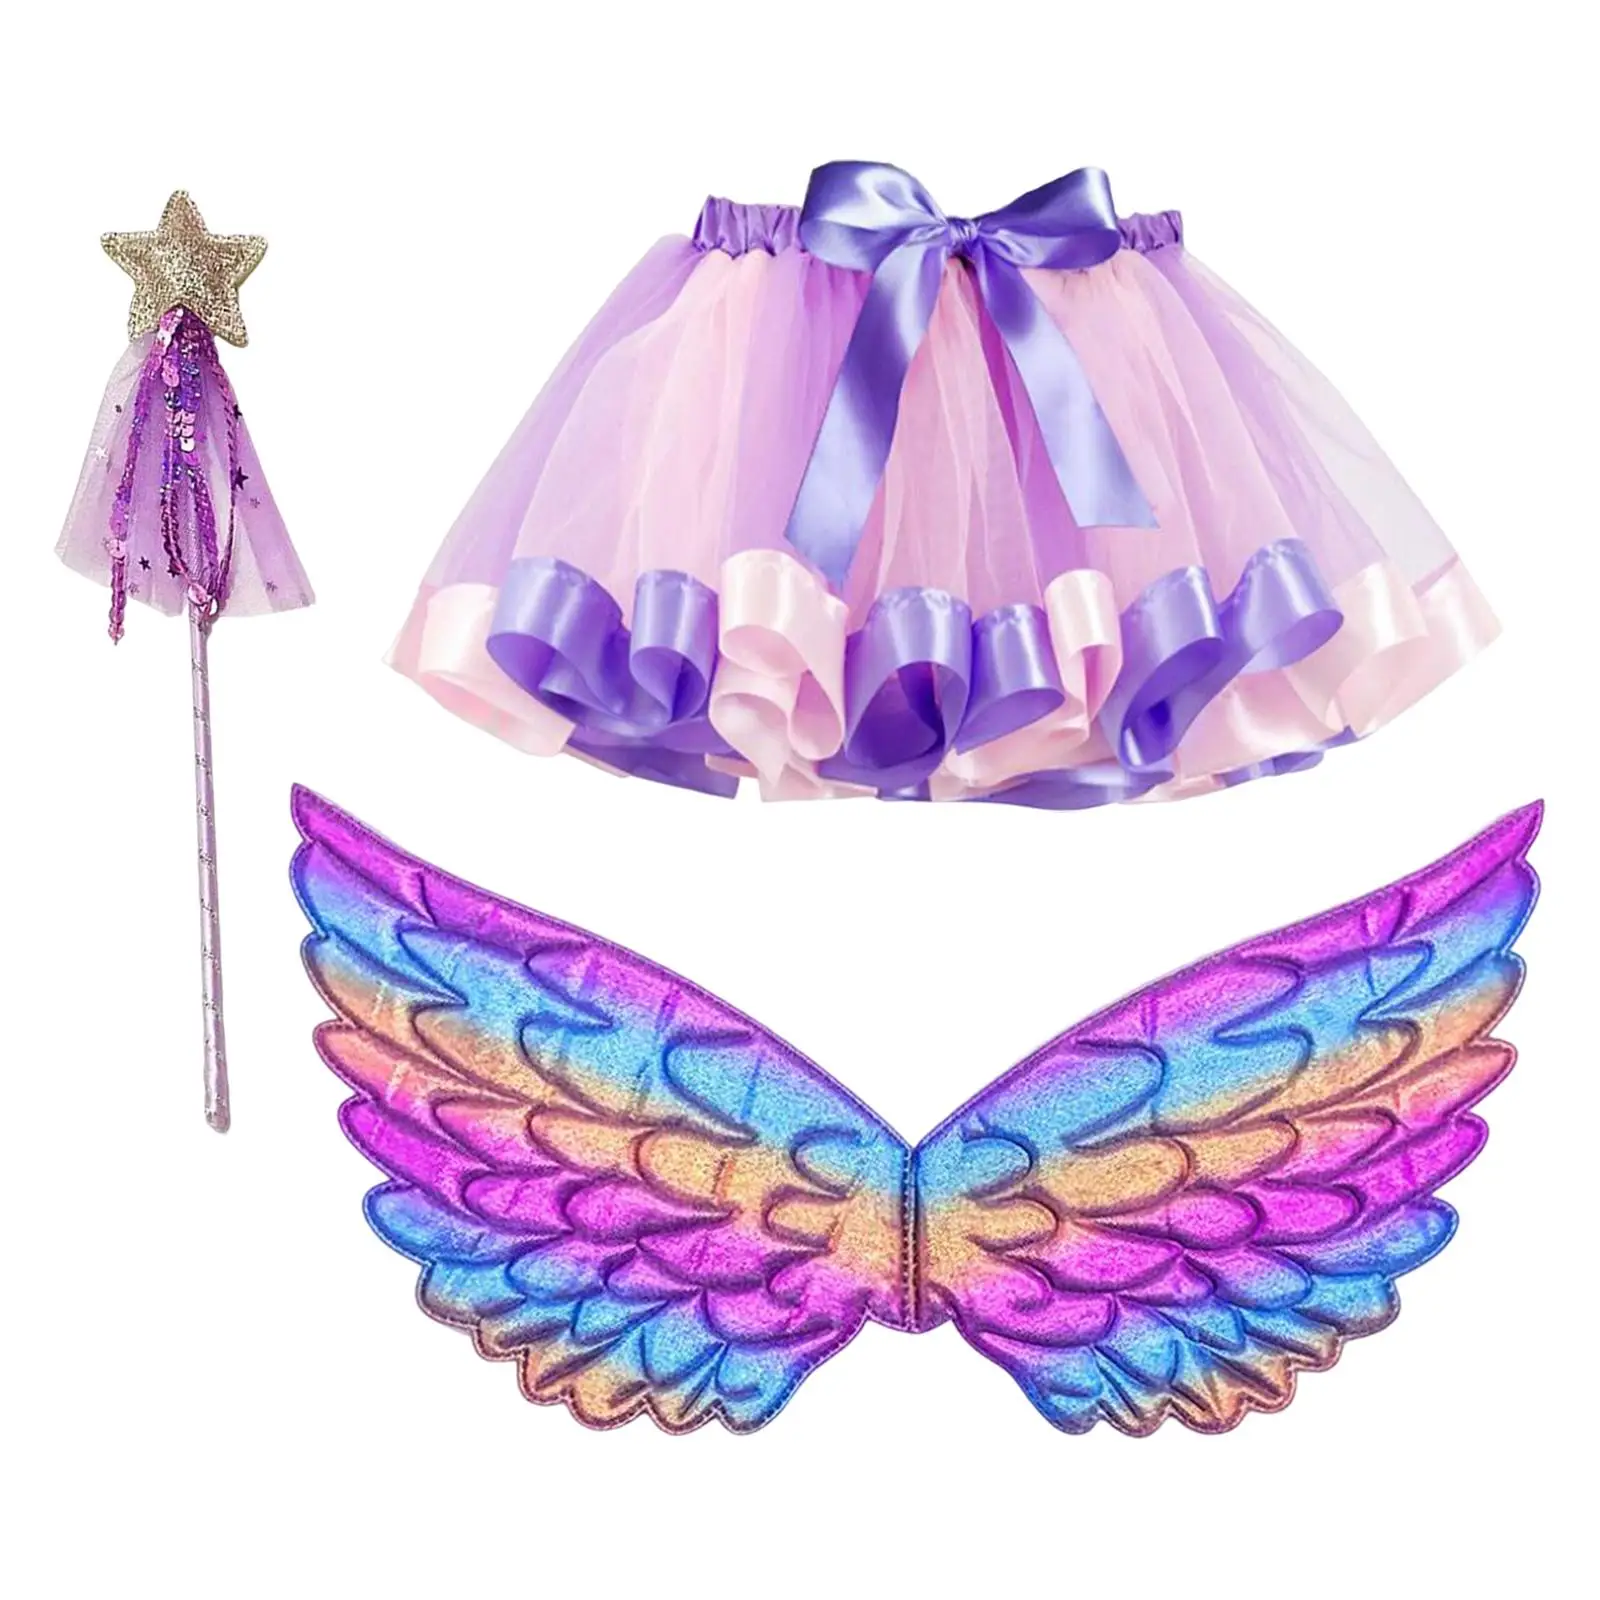 Girls Fairy Costume Set with Butterfly Wing Wand for Photo Prop Cosplay Ballet Dance Halloween Ages 3-6